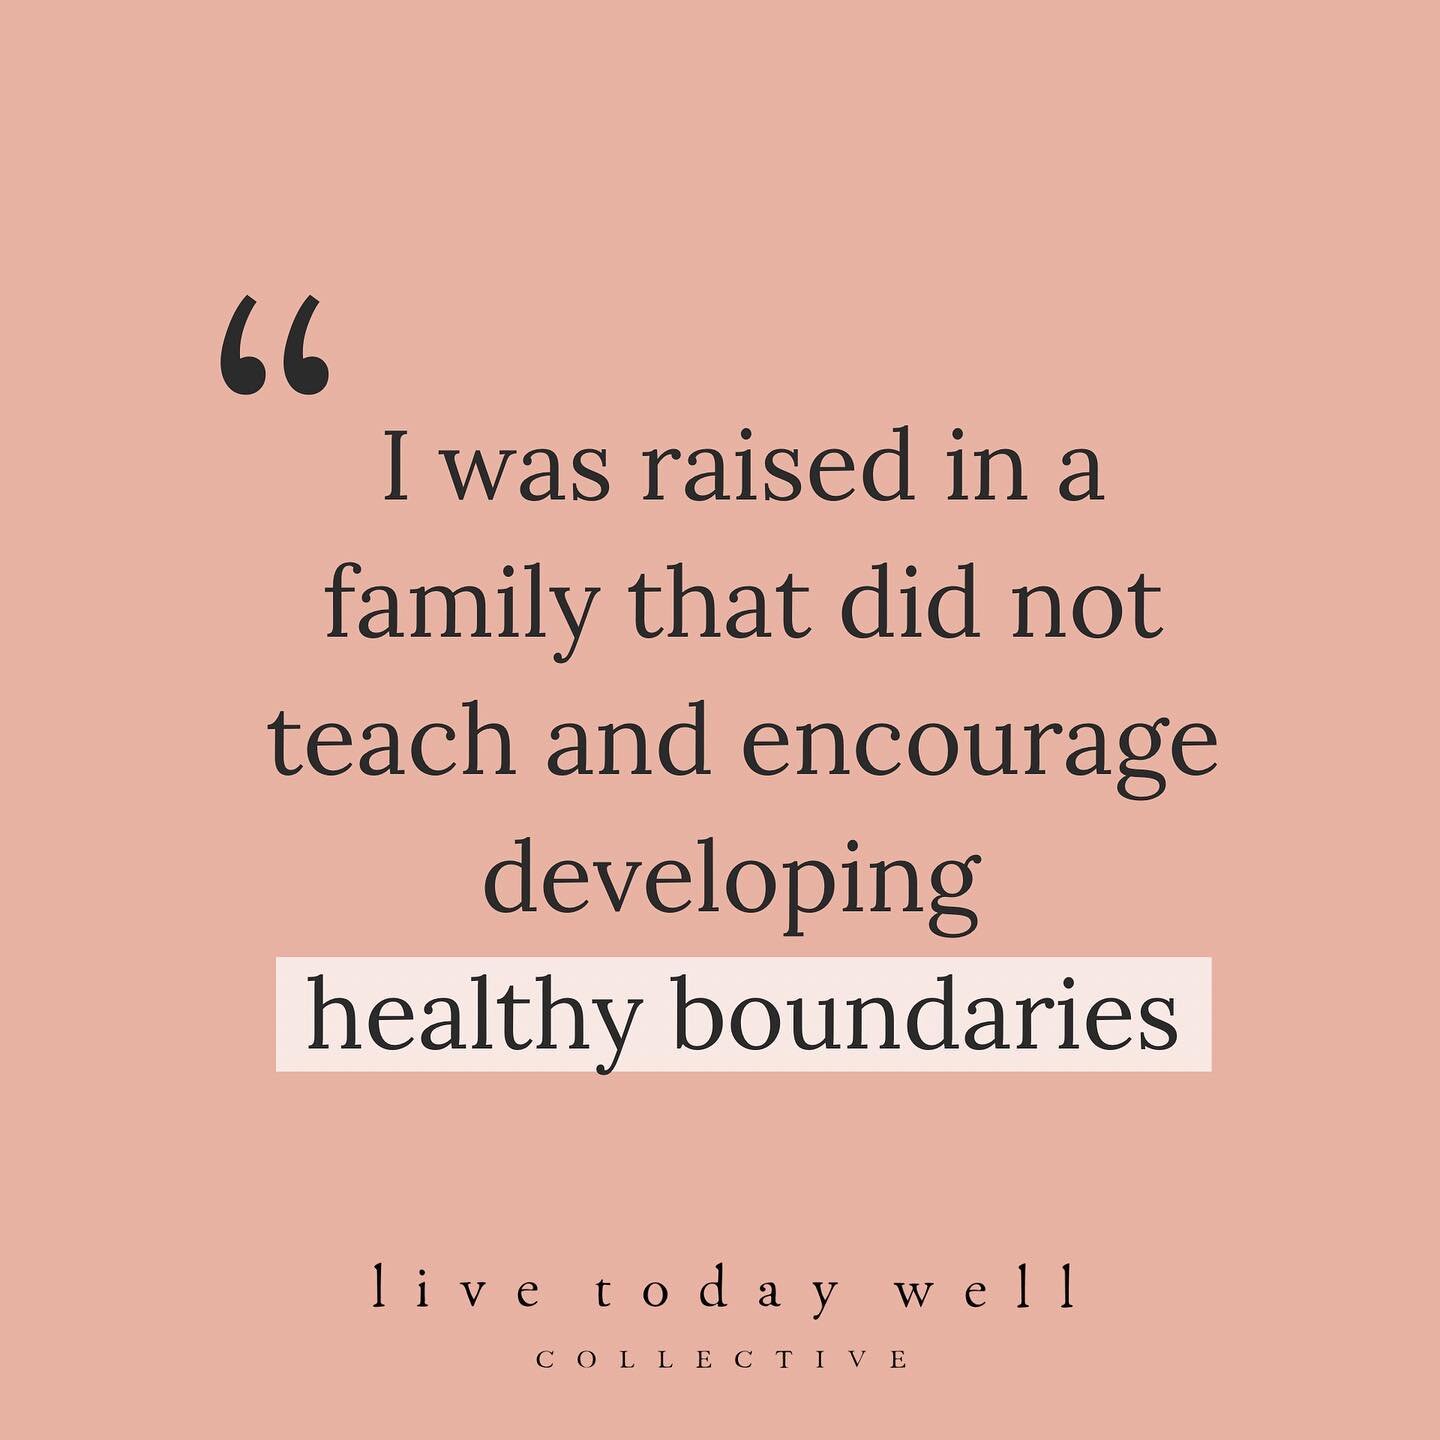 &ldquo;Boundaries are necessary, yes. They are also sacred and holy.&rdquo; -Adrienne Stravitsch

Who feels a little called out and surprised by this amazing quote? 

The truth is, boundaries allow us to respect ourselves and those around us by keepi